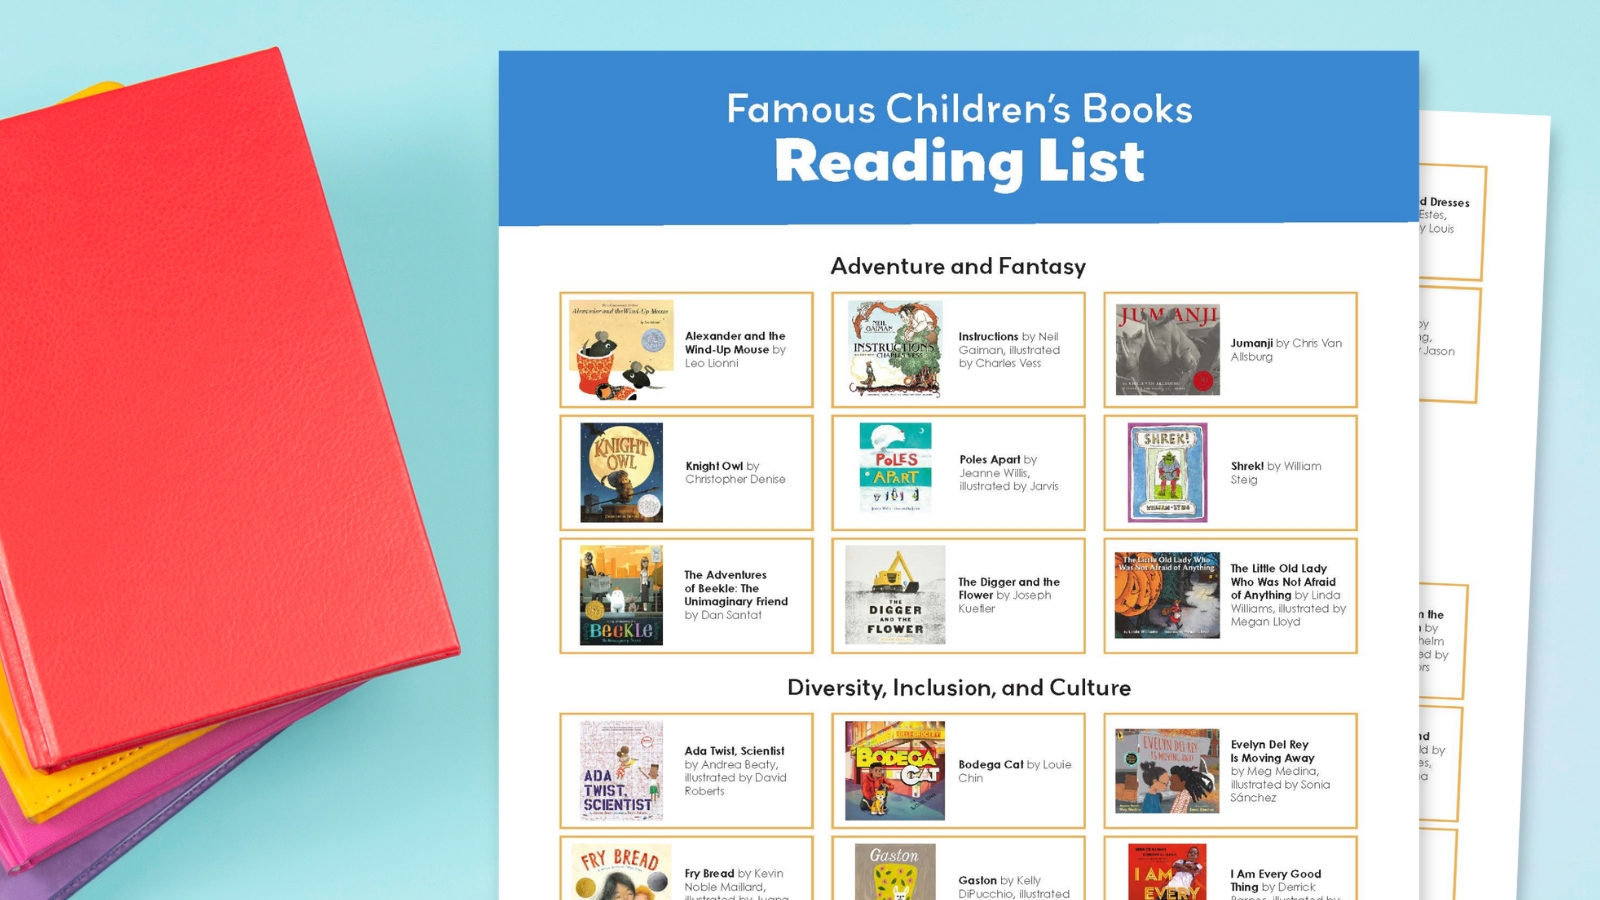 Printable reading list with 100 famous children's books.